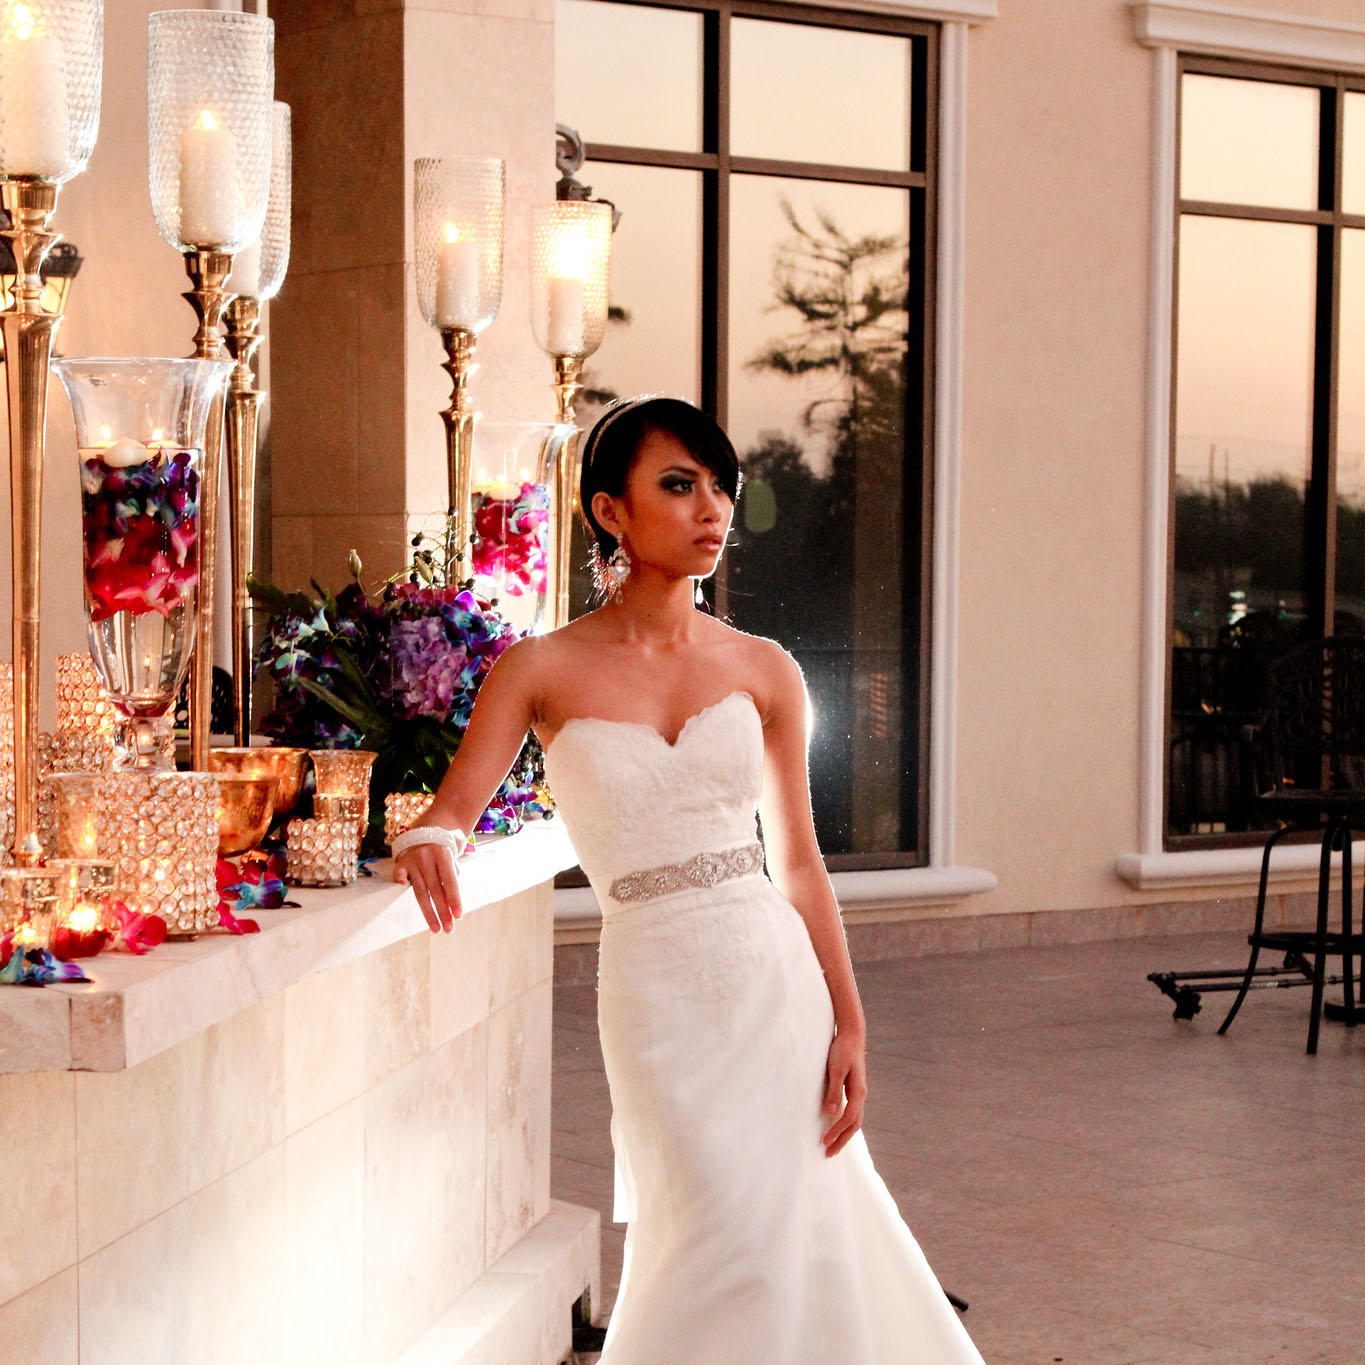 Bride on Royal Palm's terrace. Photo: Jessica The Photographer